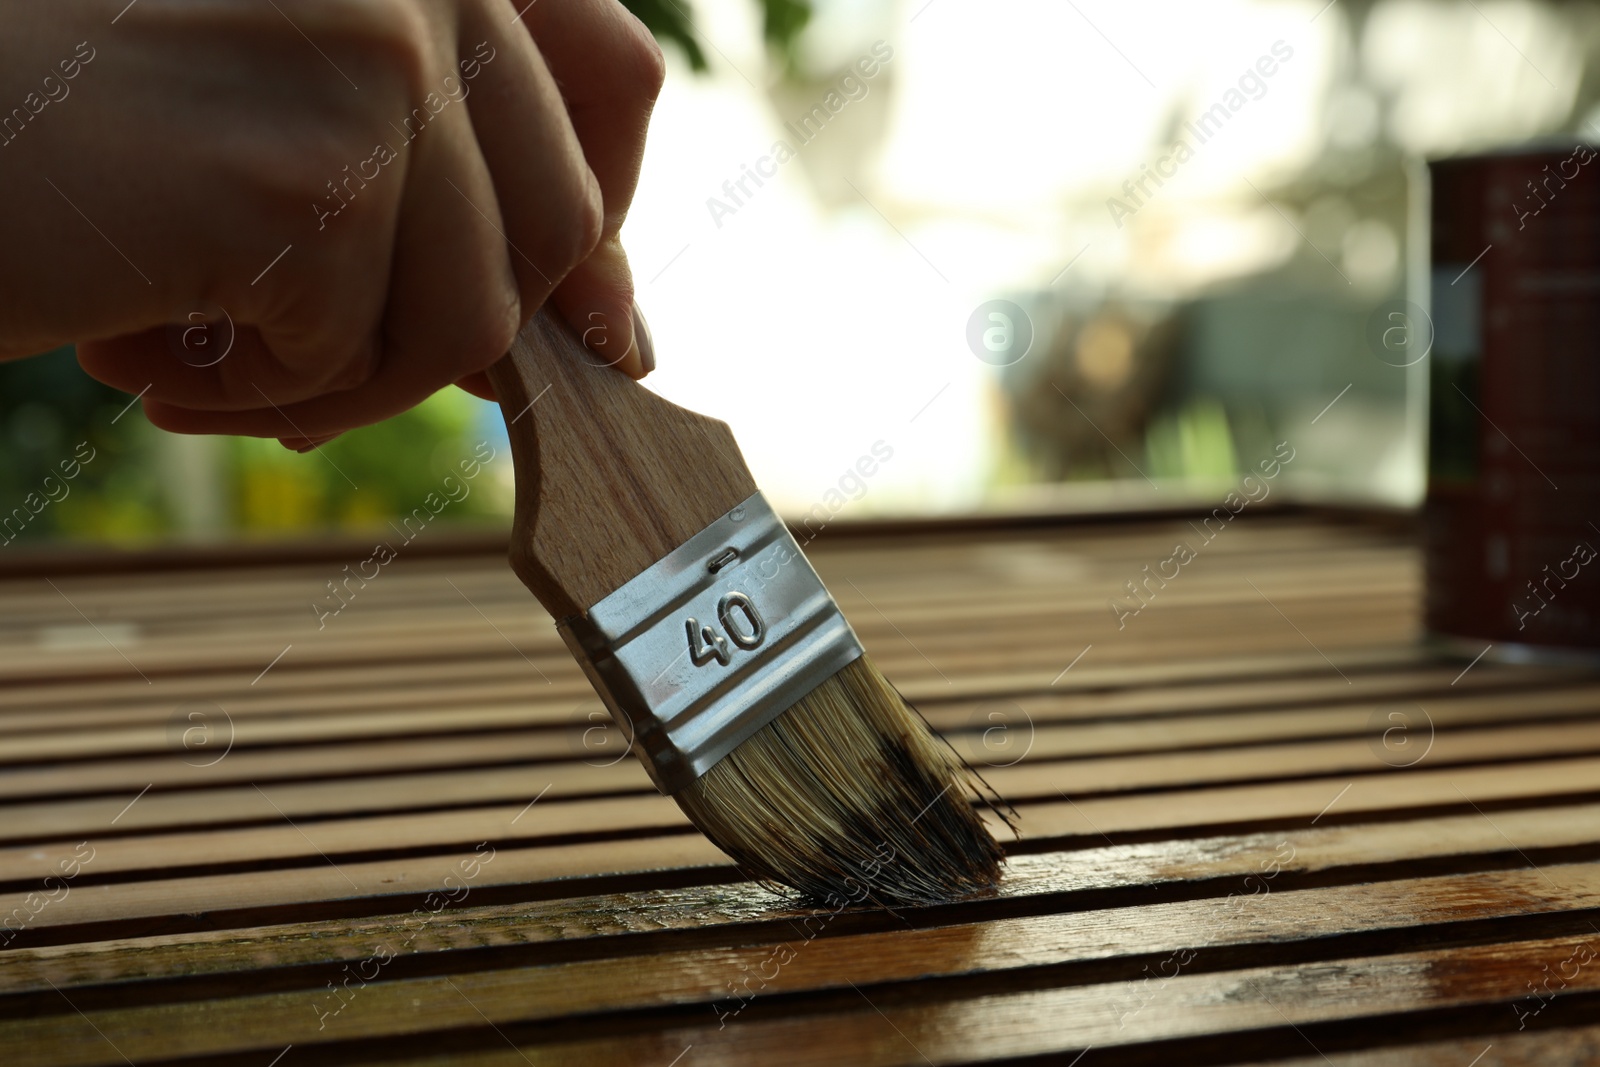 Photo of Woman applying wood stain onto planks outdoors, closeup